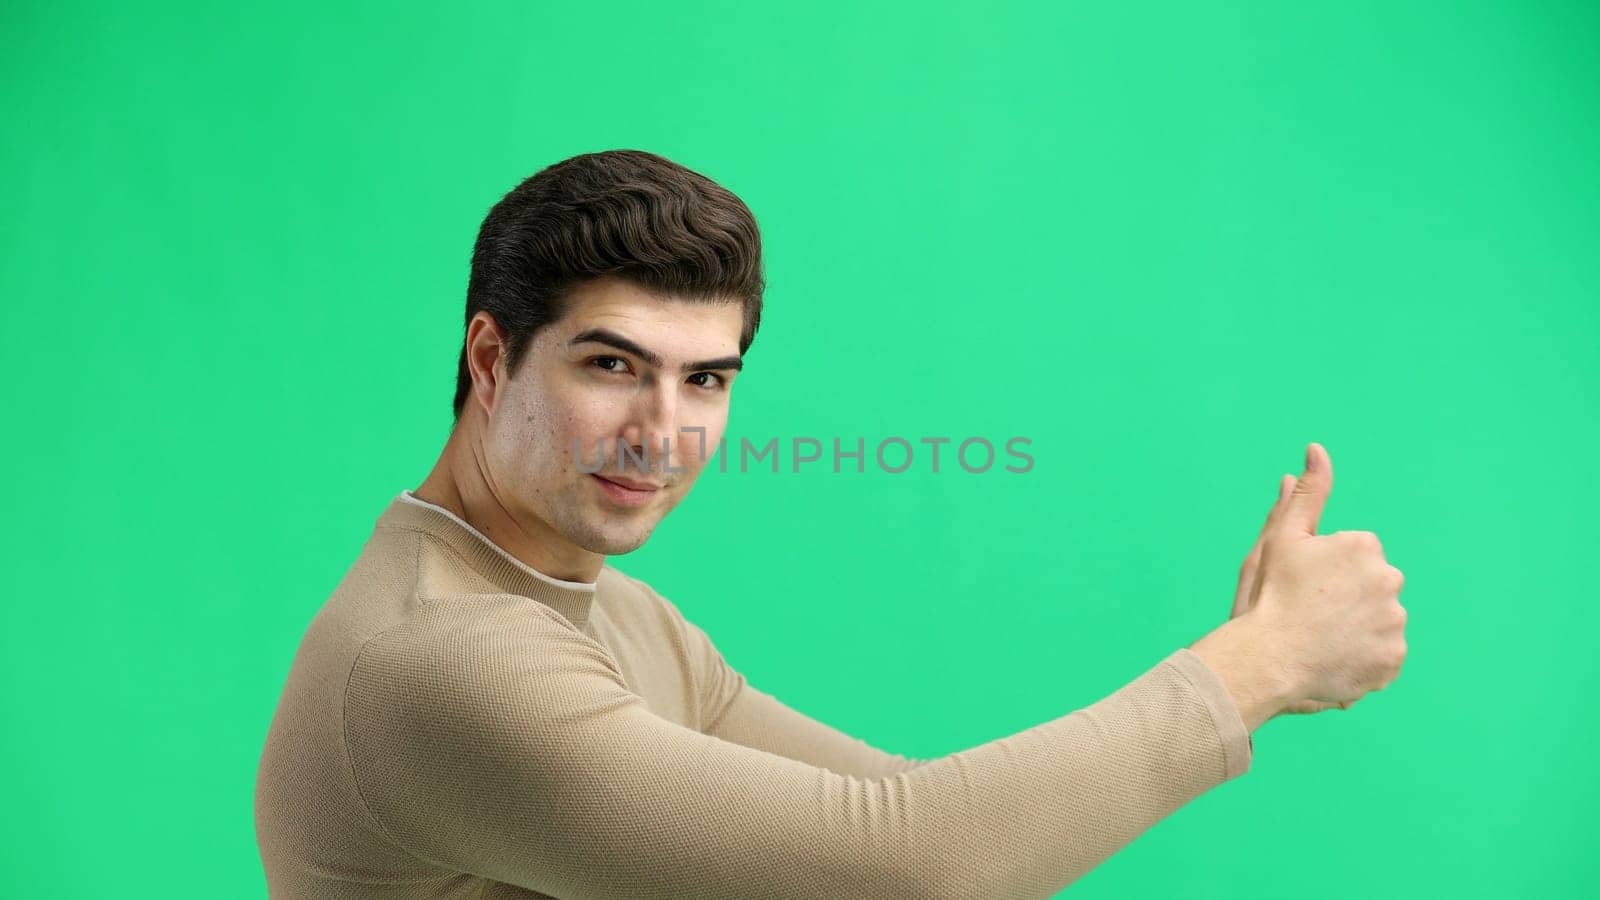 A man, close-up, on a green background, shows his thumbs up.